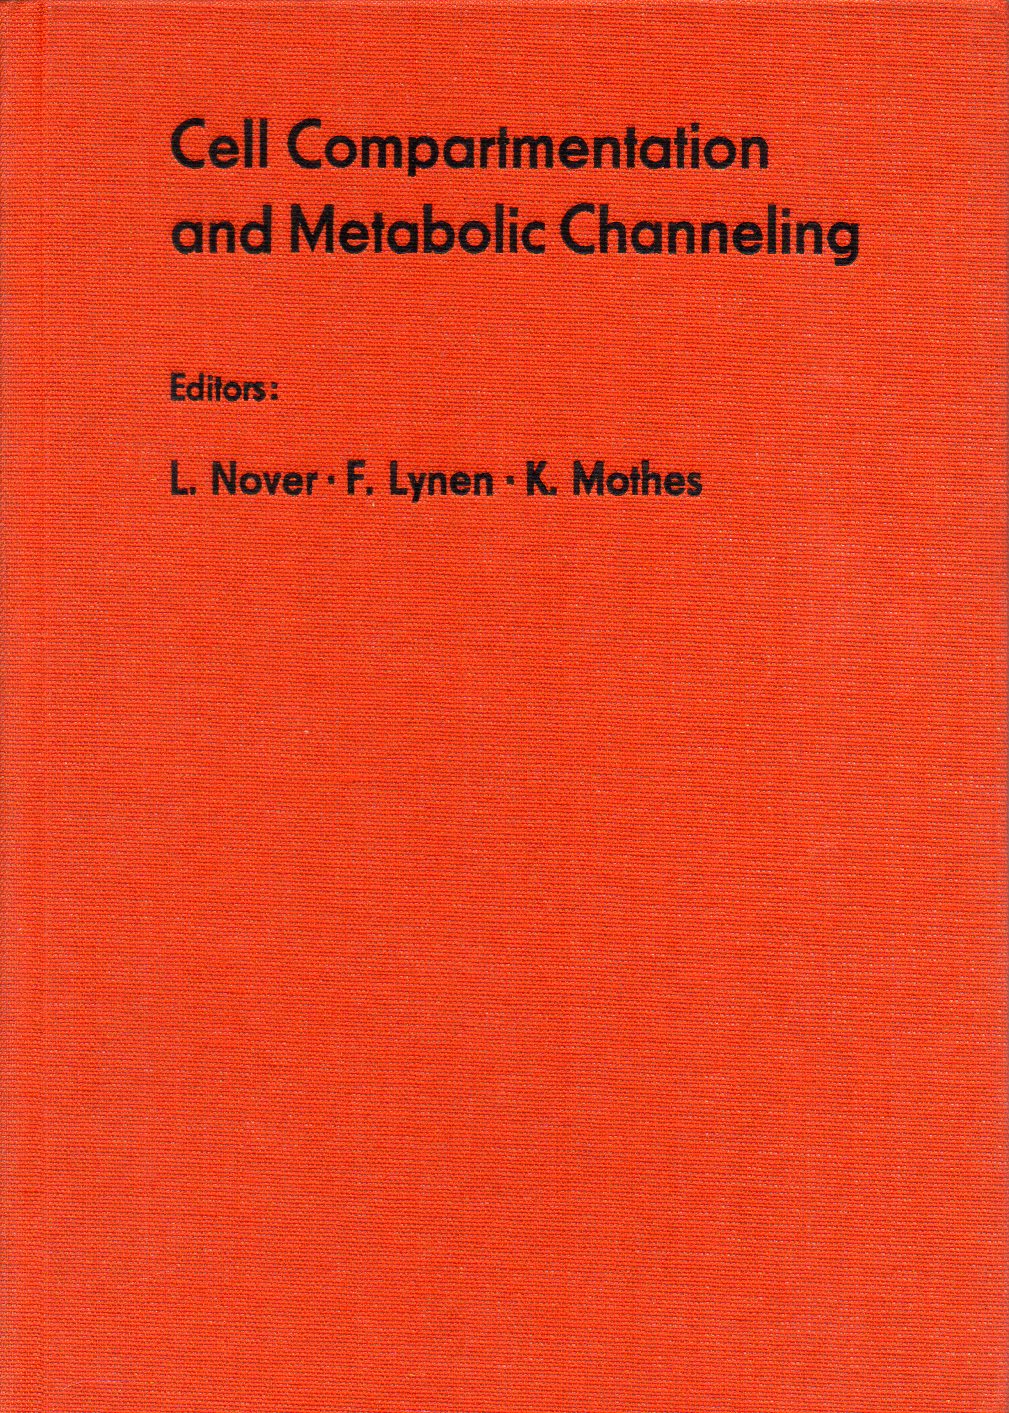 Nover,Lutz+F.Lynen+Kurt Mothes  Cell Compartmentation and Metabolic Channeling 